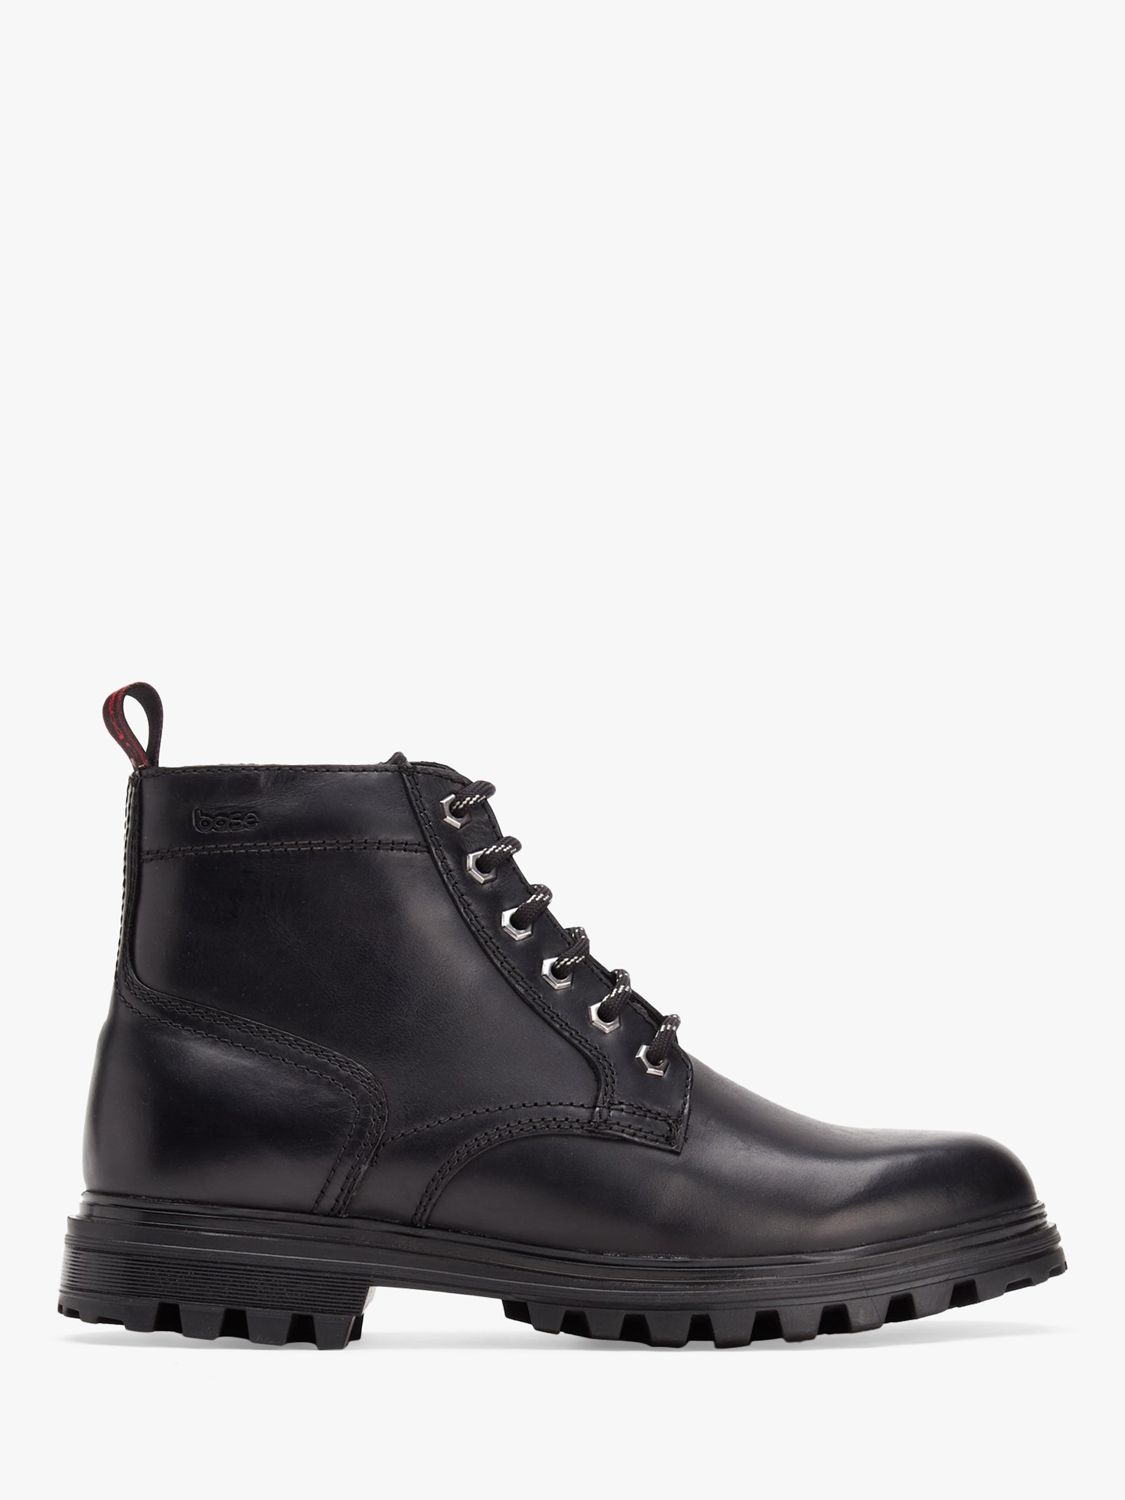 Base London Brooklyn Leather Lace Up Boots